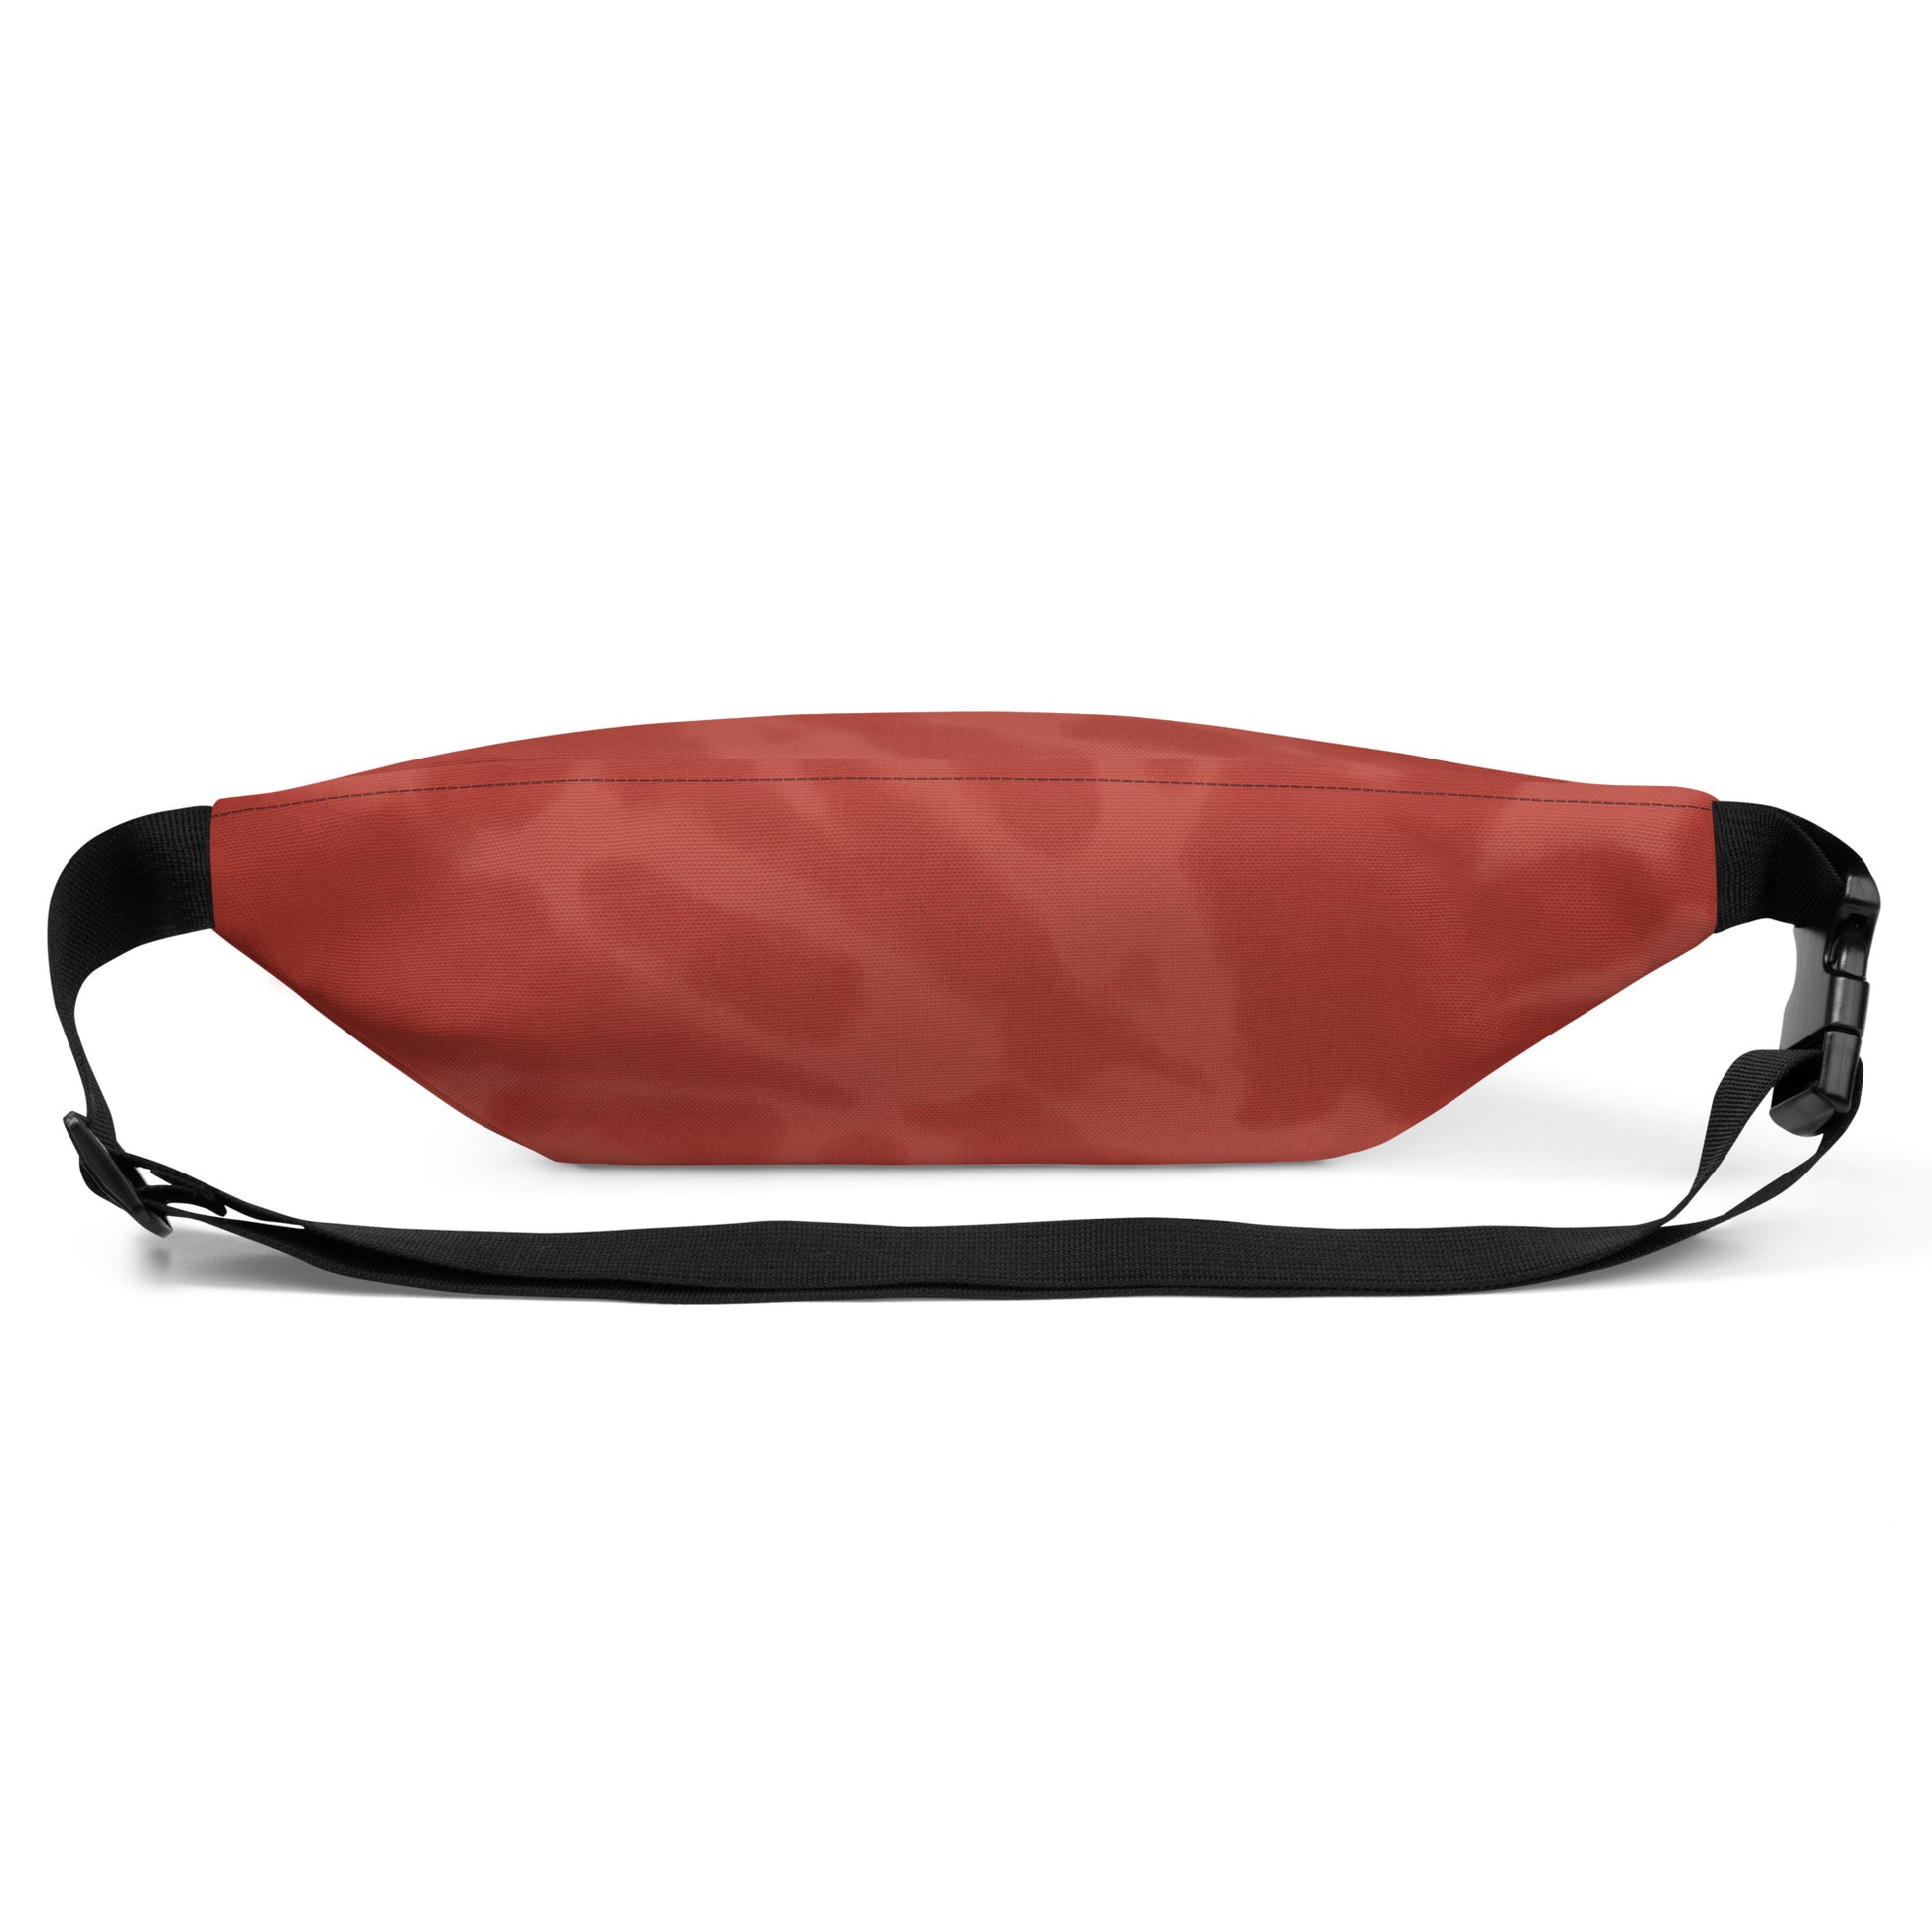 Travel Gift Fanny Pack - Red Tie-Dye • MSY New Orleans • YHM Designs - Image 09